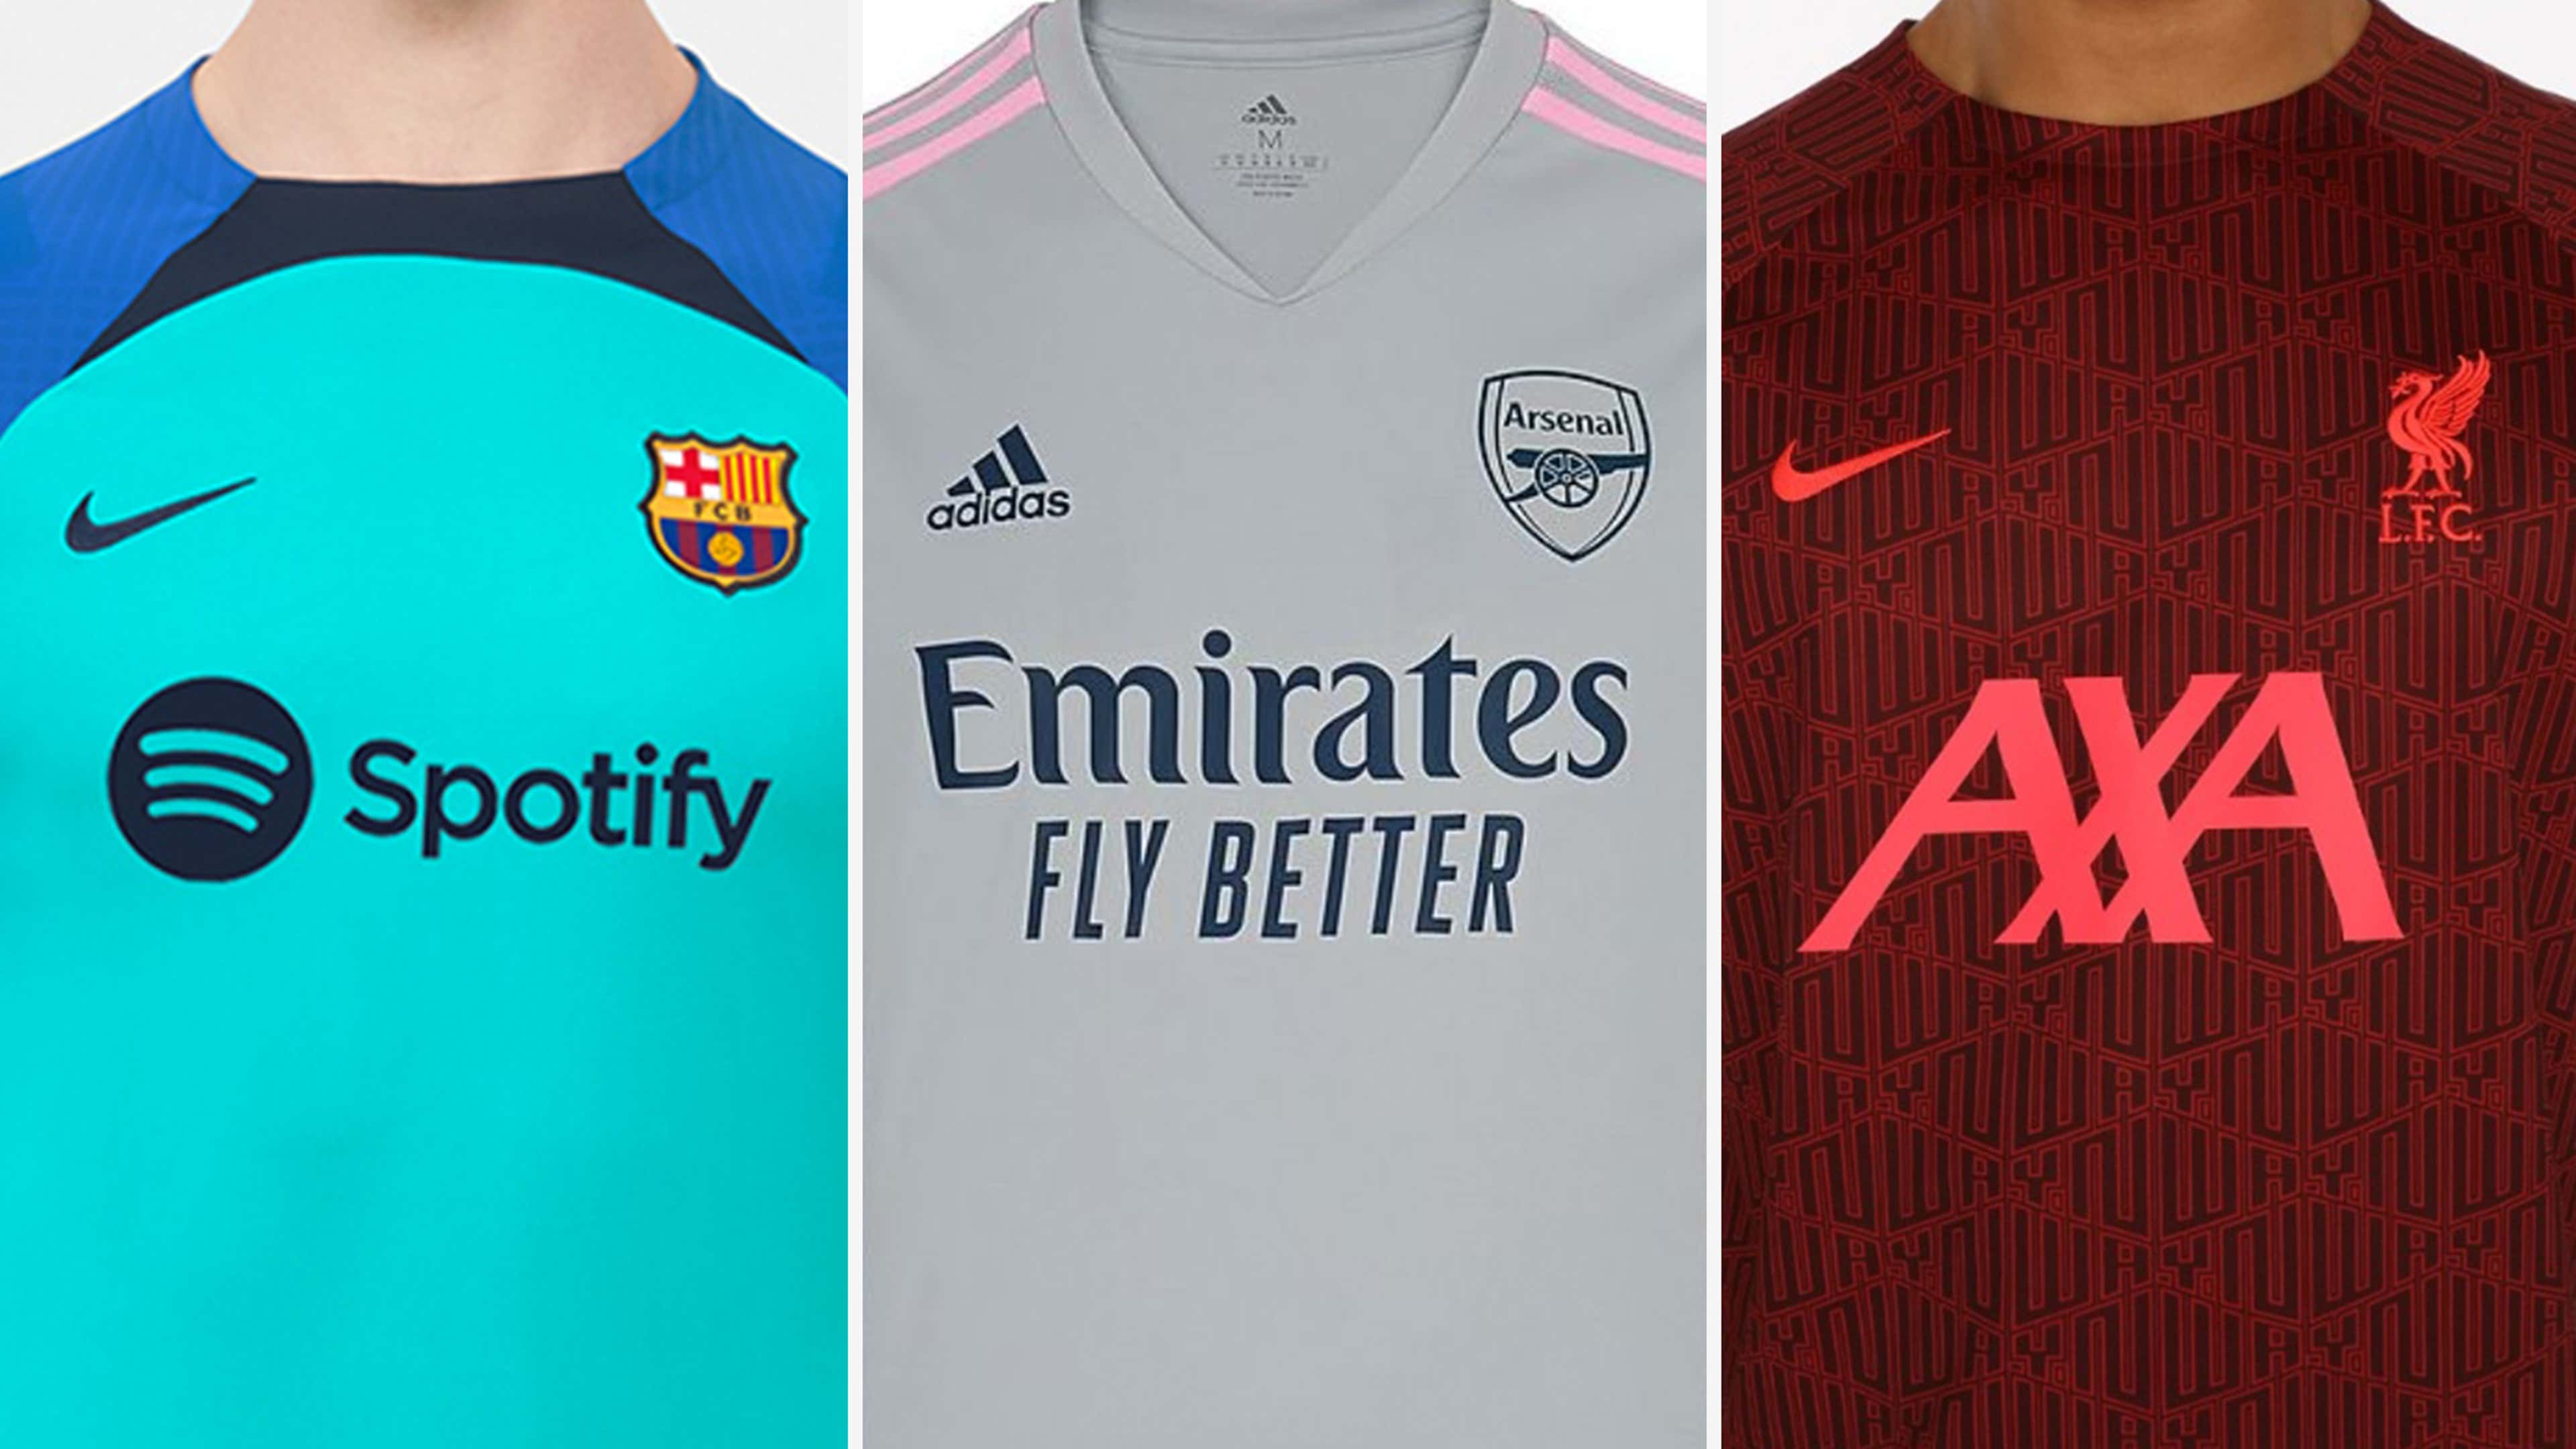 2016/17 Adidas Away Kits: Manchester United, Real Madrid, Chelsea